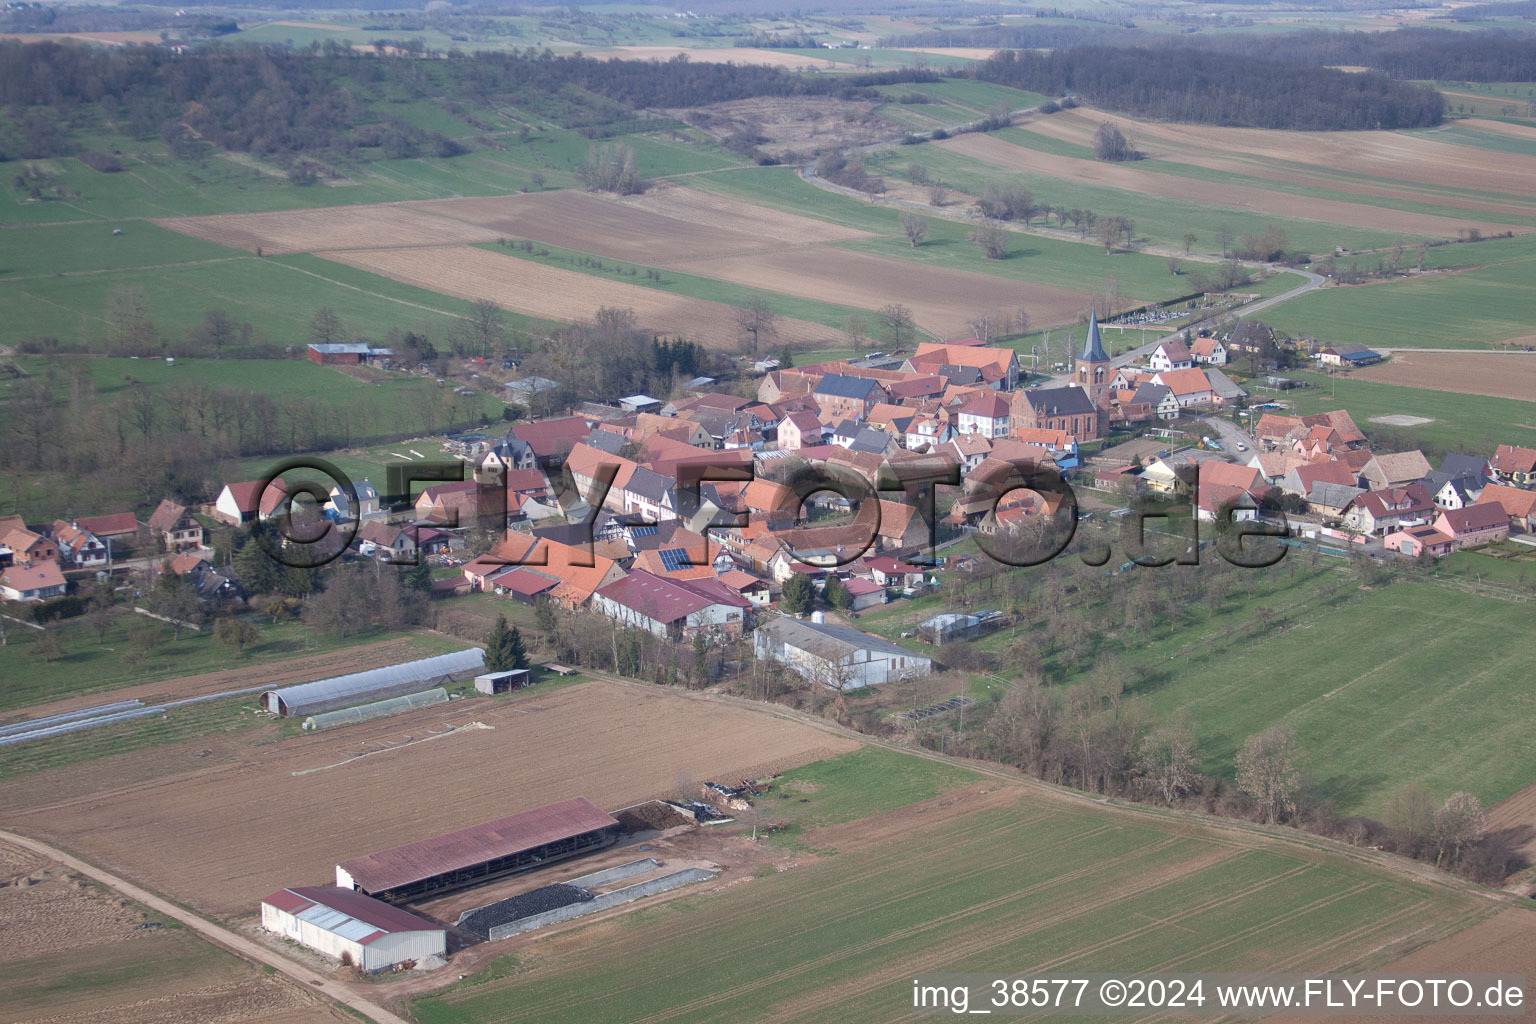 Village - view on the edge of agricultural fields and farmland in Geiswiller in Grand Est, France